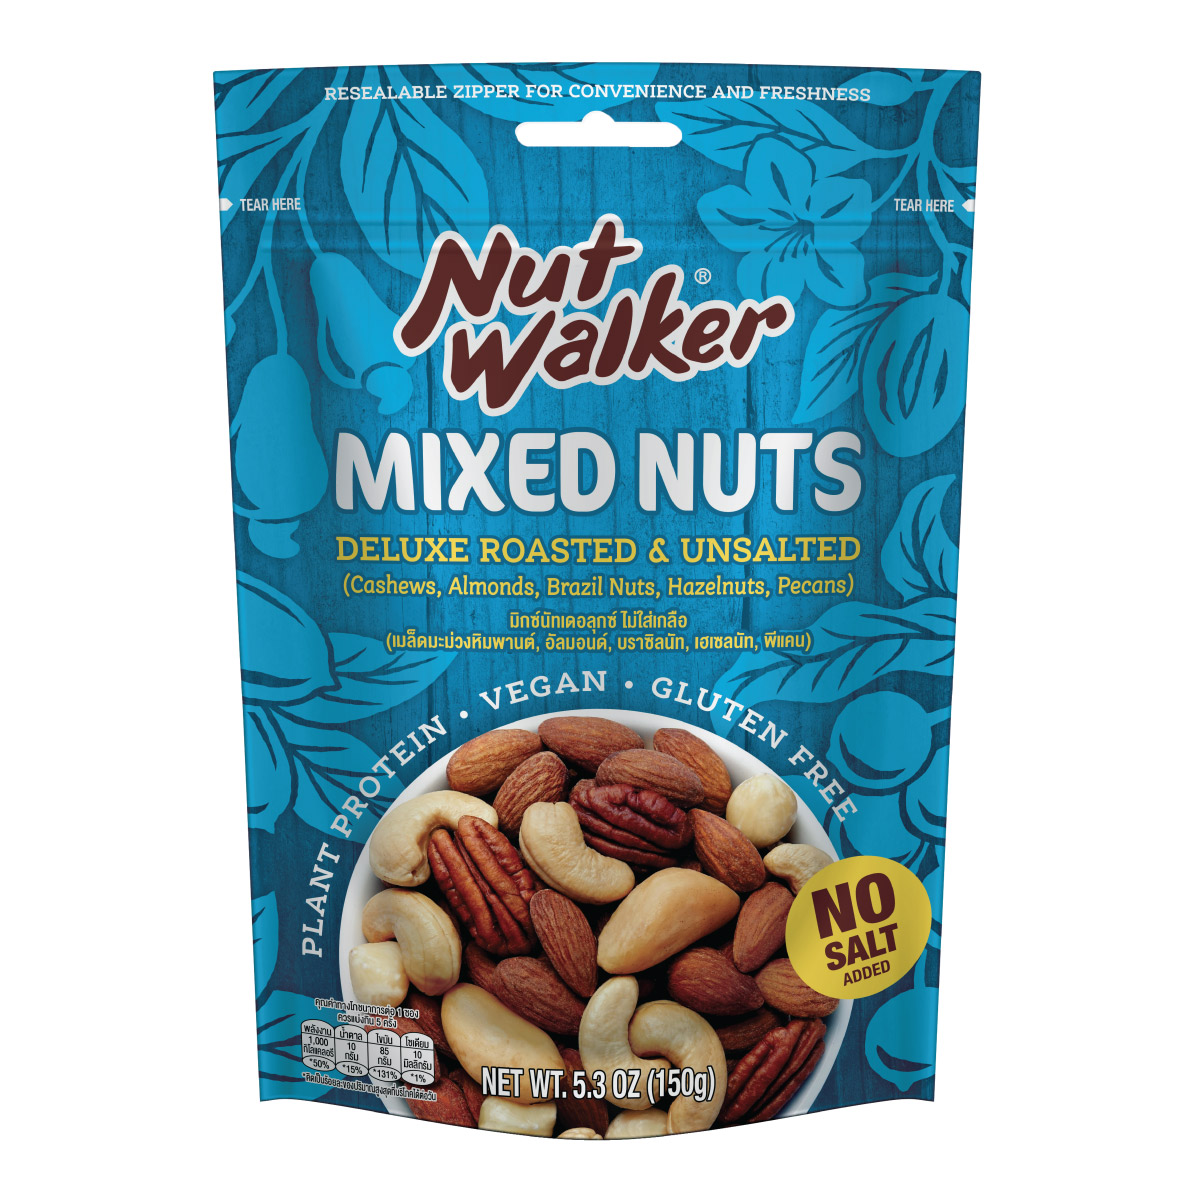 Deluxe-Roasted-&-Unsalted-Mixed-Nuts-150g